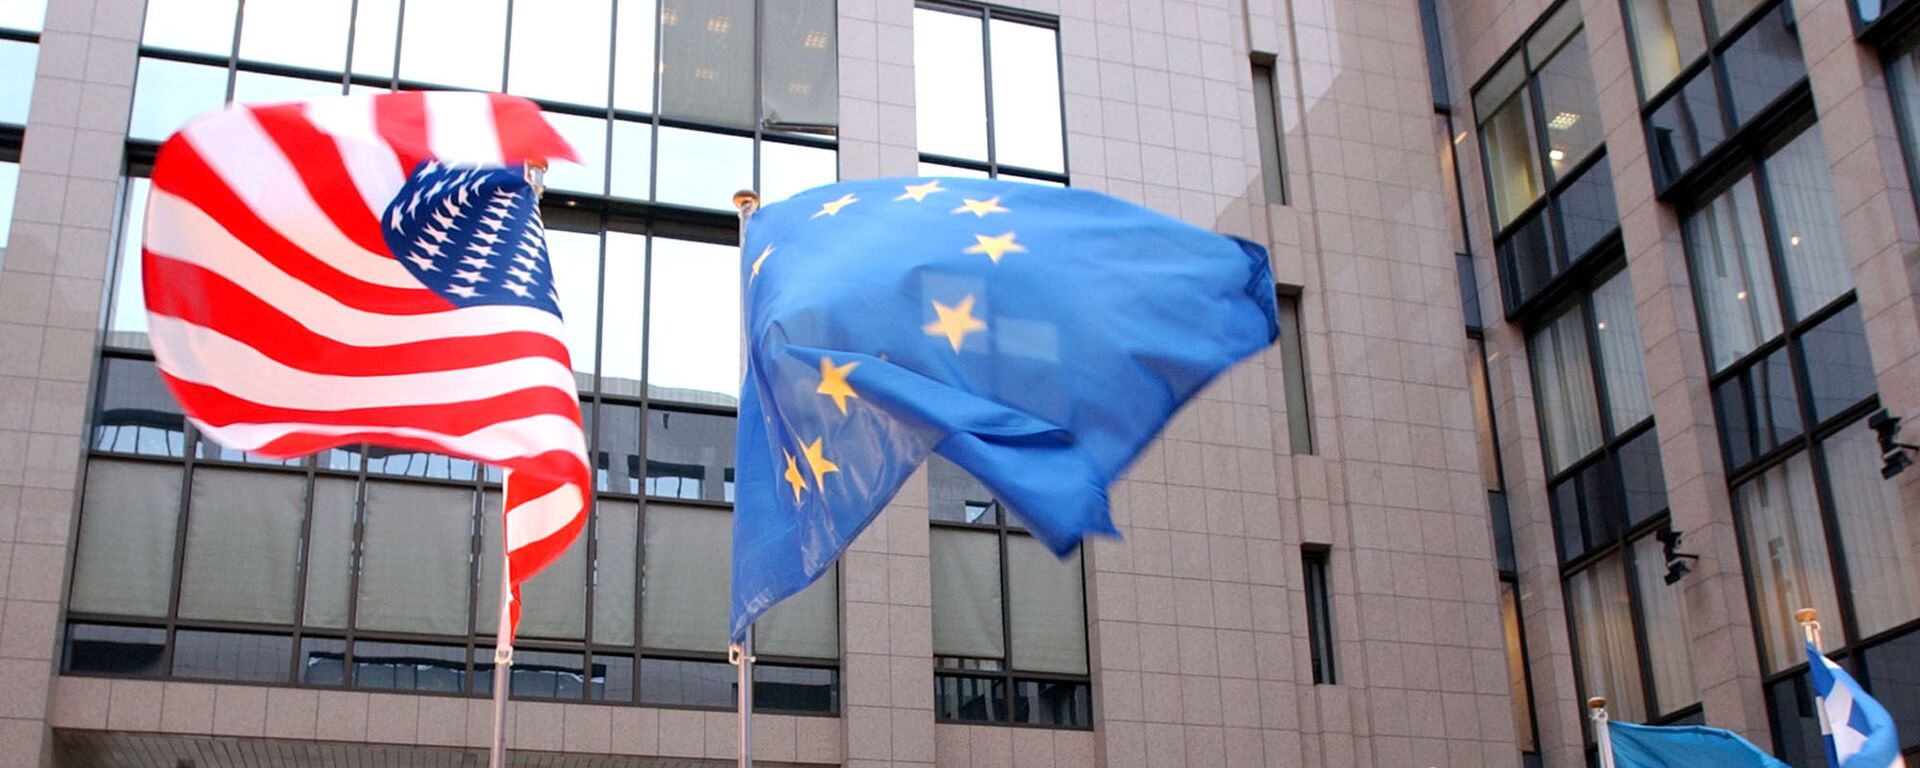 The US and EU flags, top left and right, fly in separate directions at the European Council building in Brussels - Sputnik Moldova-România, 1920, 09.06.2021